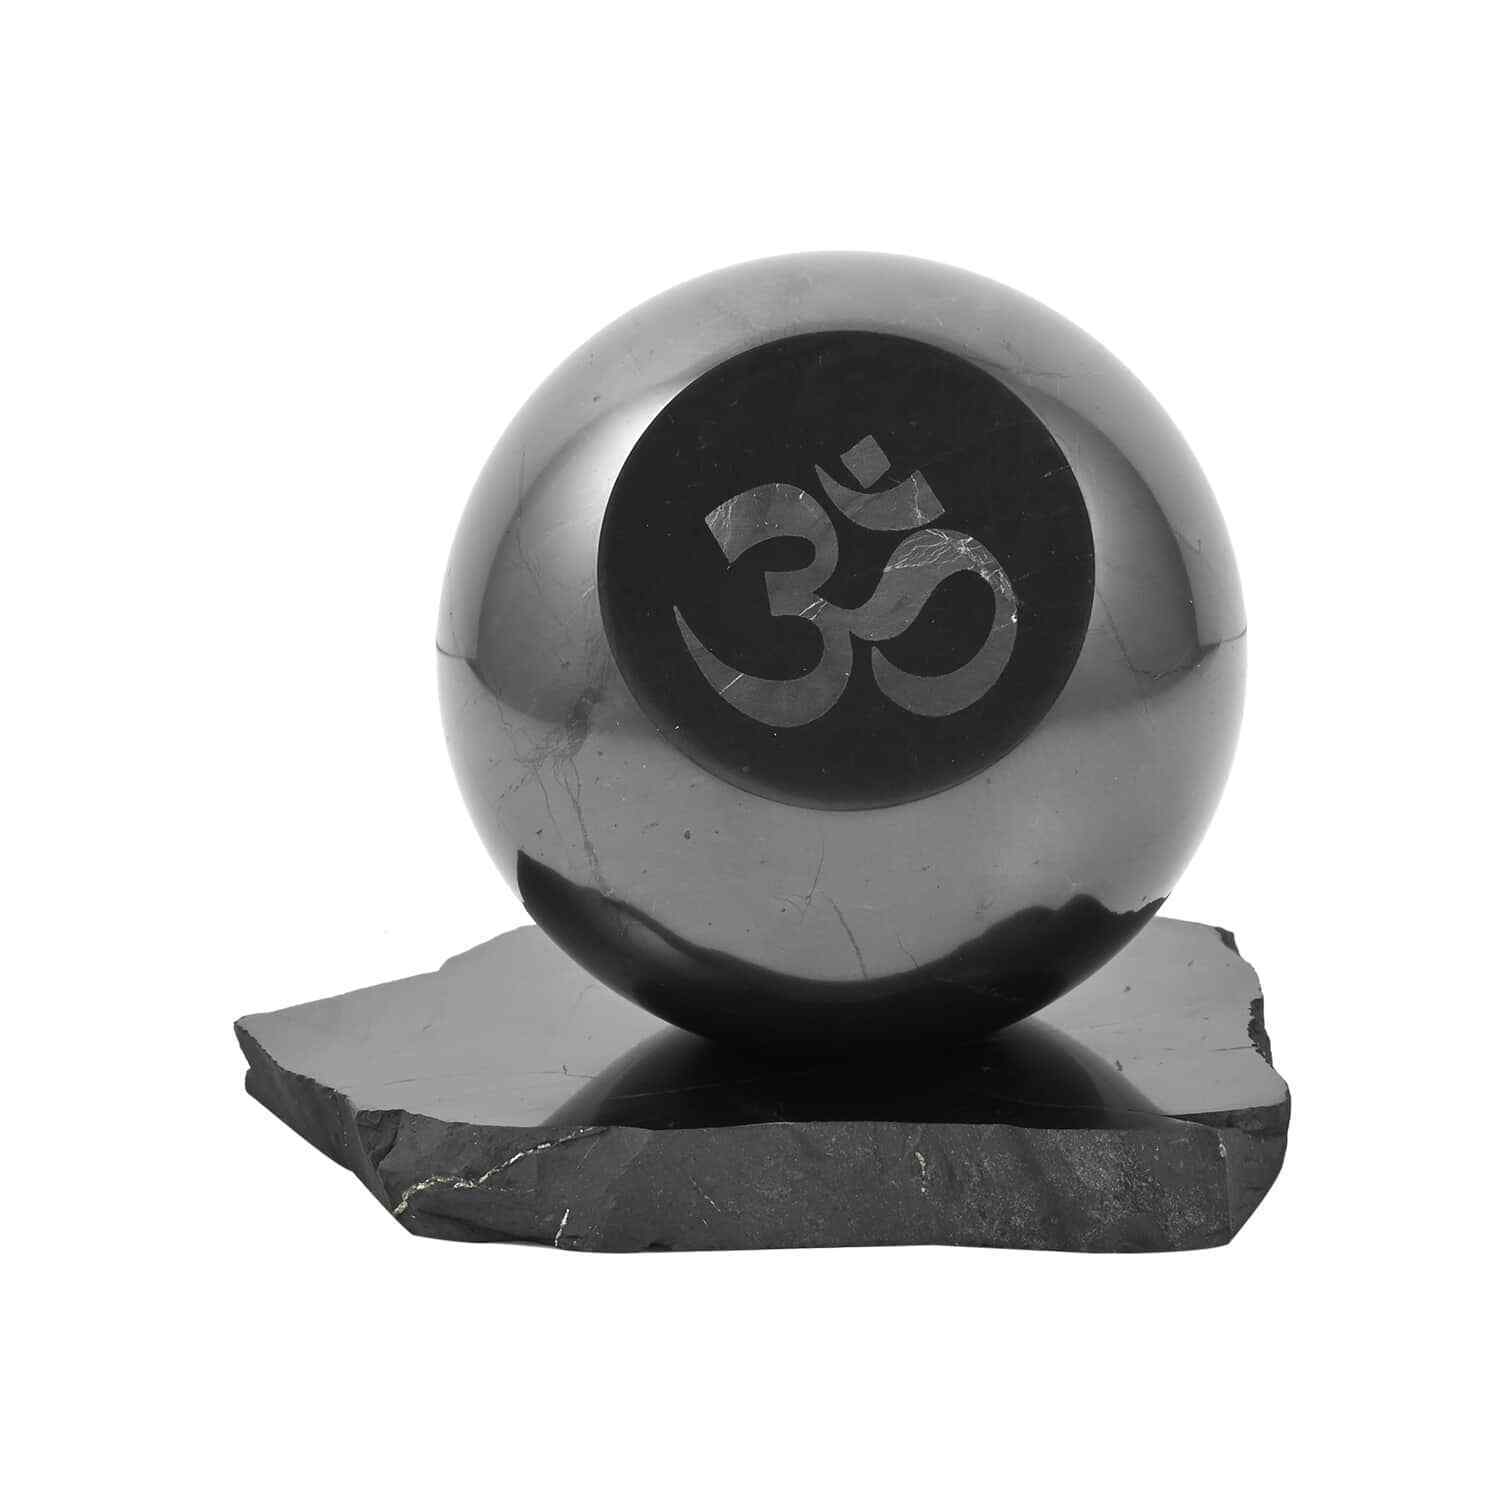 OM Symbol Engraved Black Karelian Shungite Sphere with Stand Approx. Ct 4472